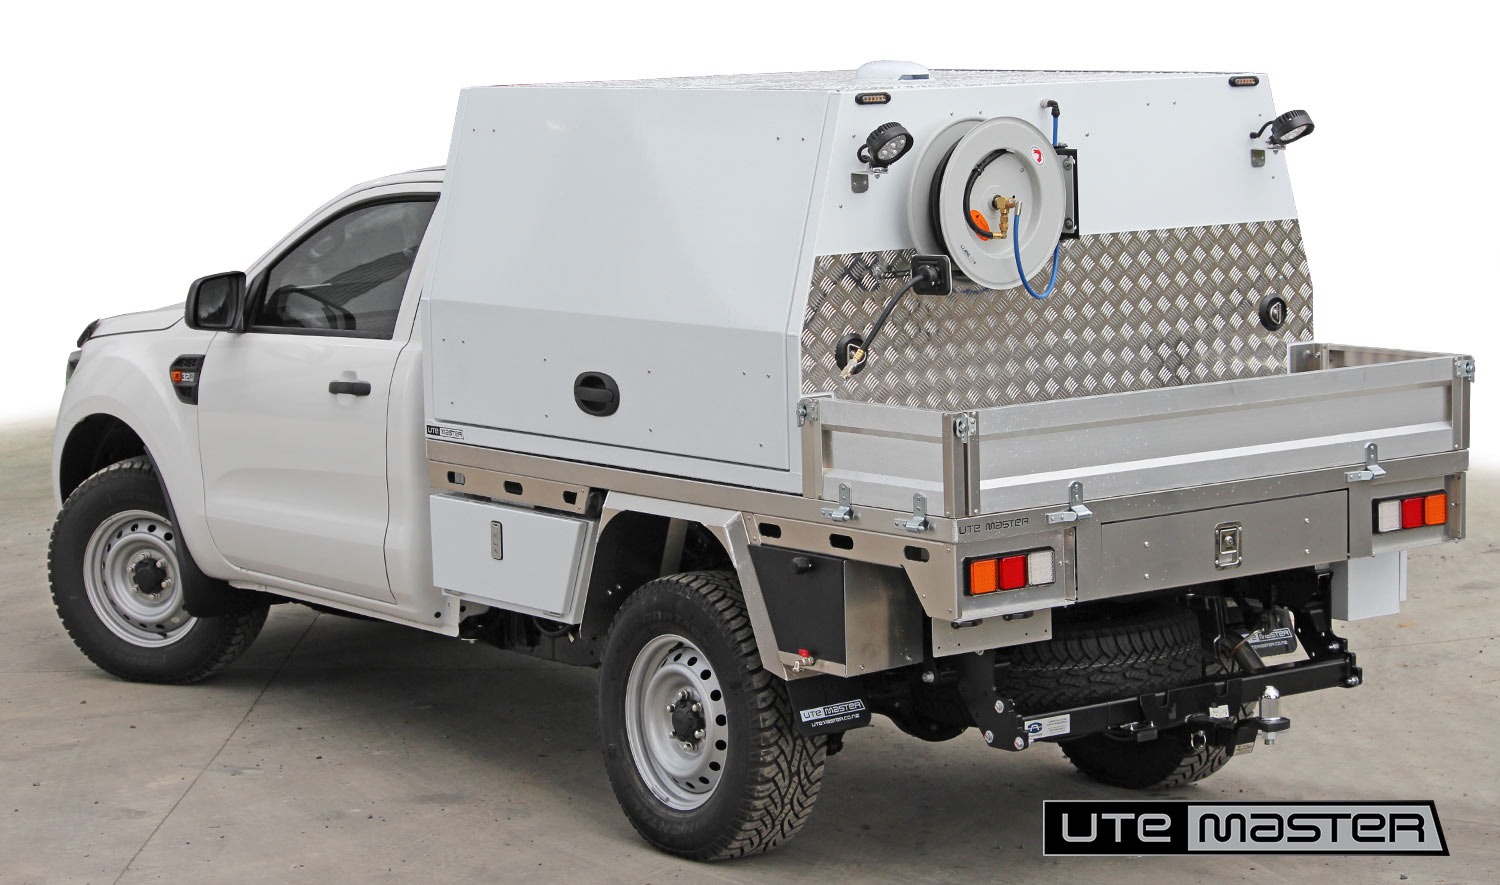 Deck Service Body Ford Ranger Flat Deck Storage Commercial Ute Mechanic Fitout